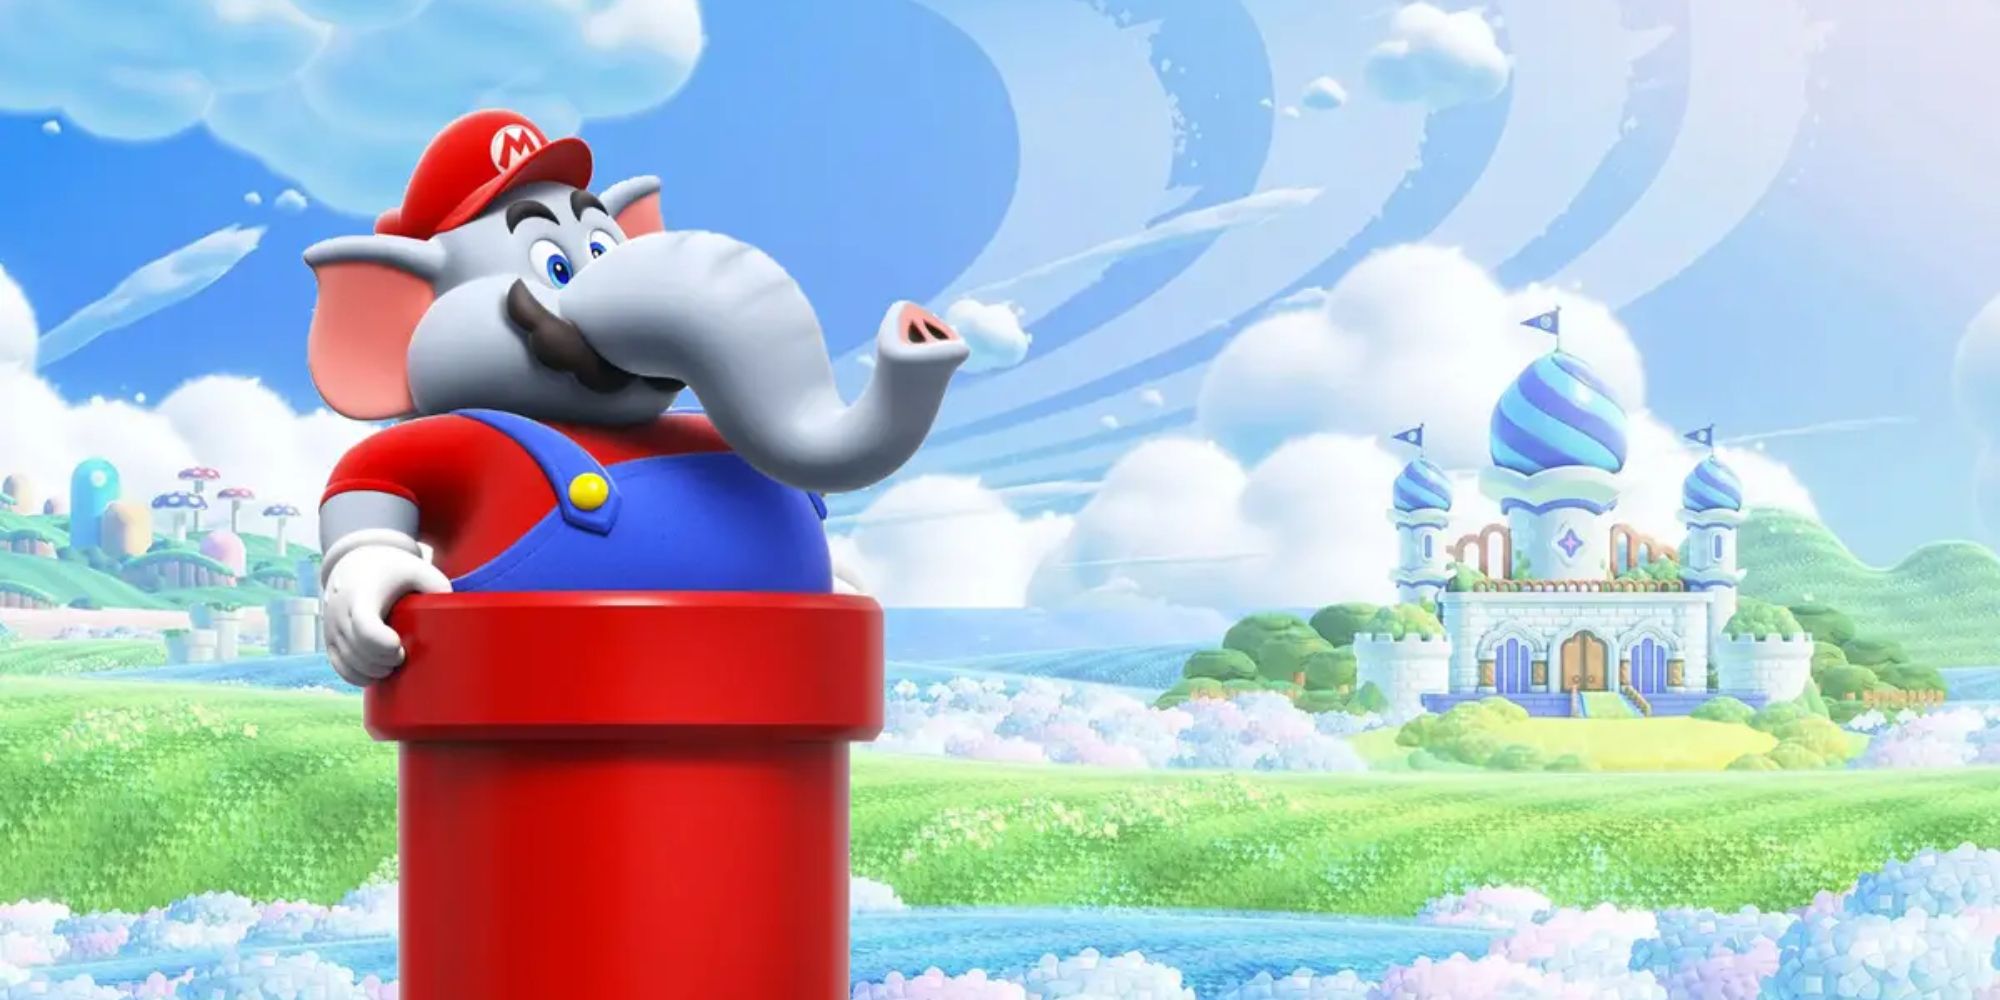 Mario as an elephant with his lower half stuck in a red warp pipe